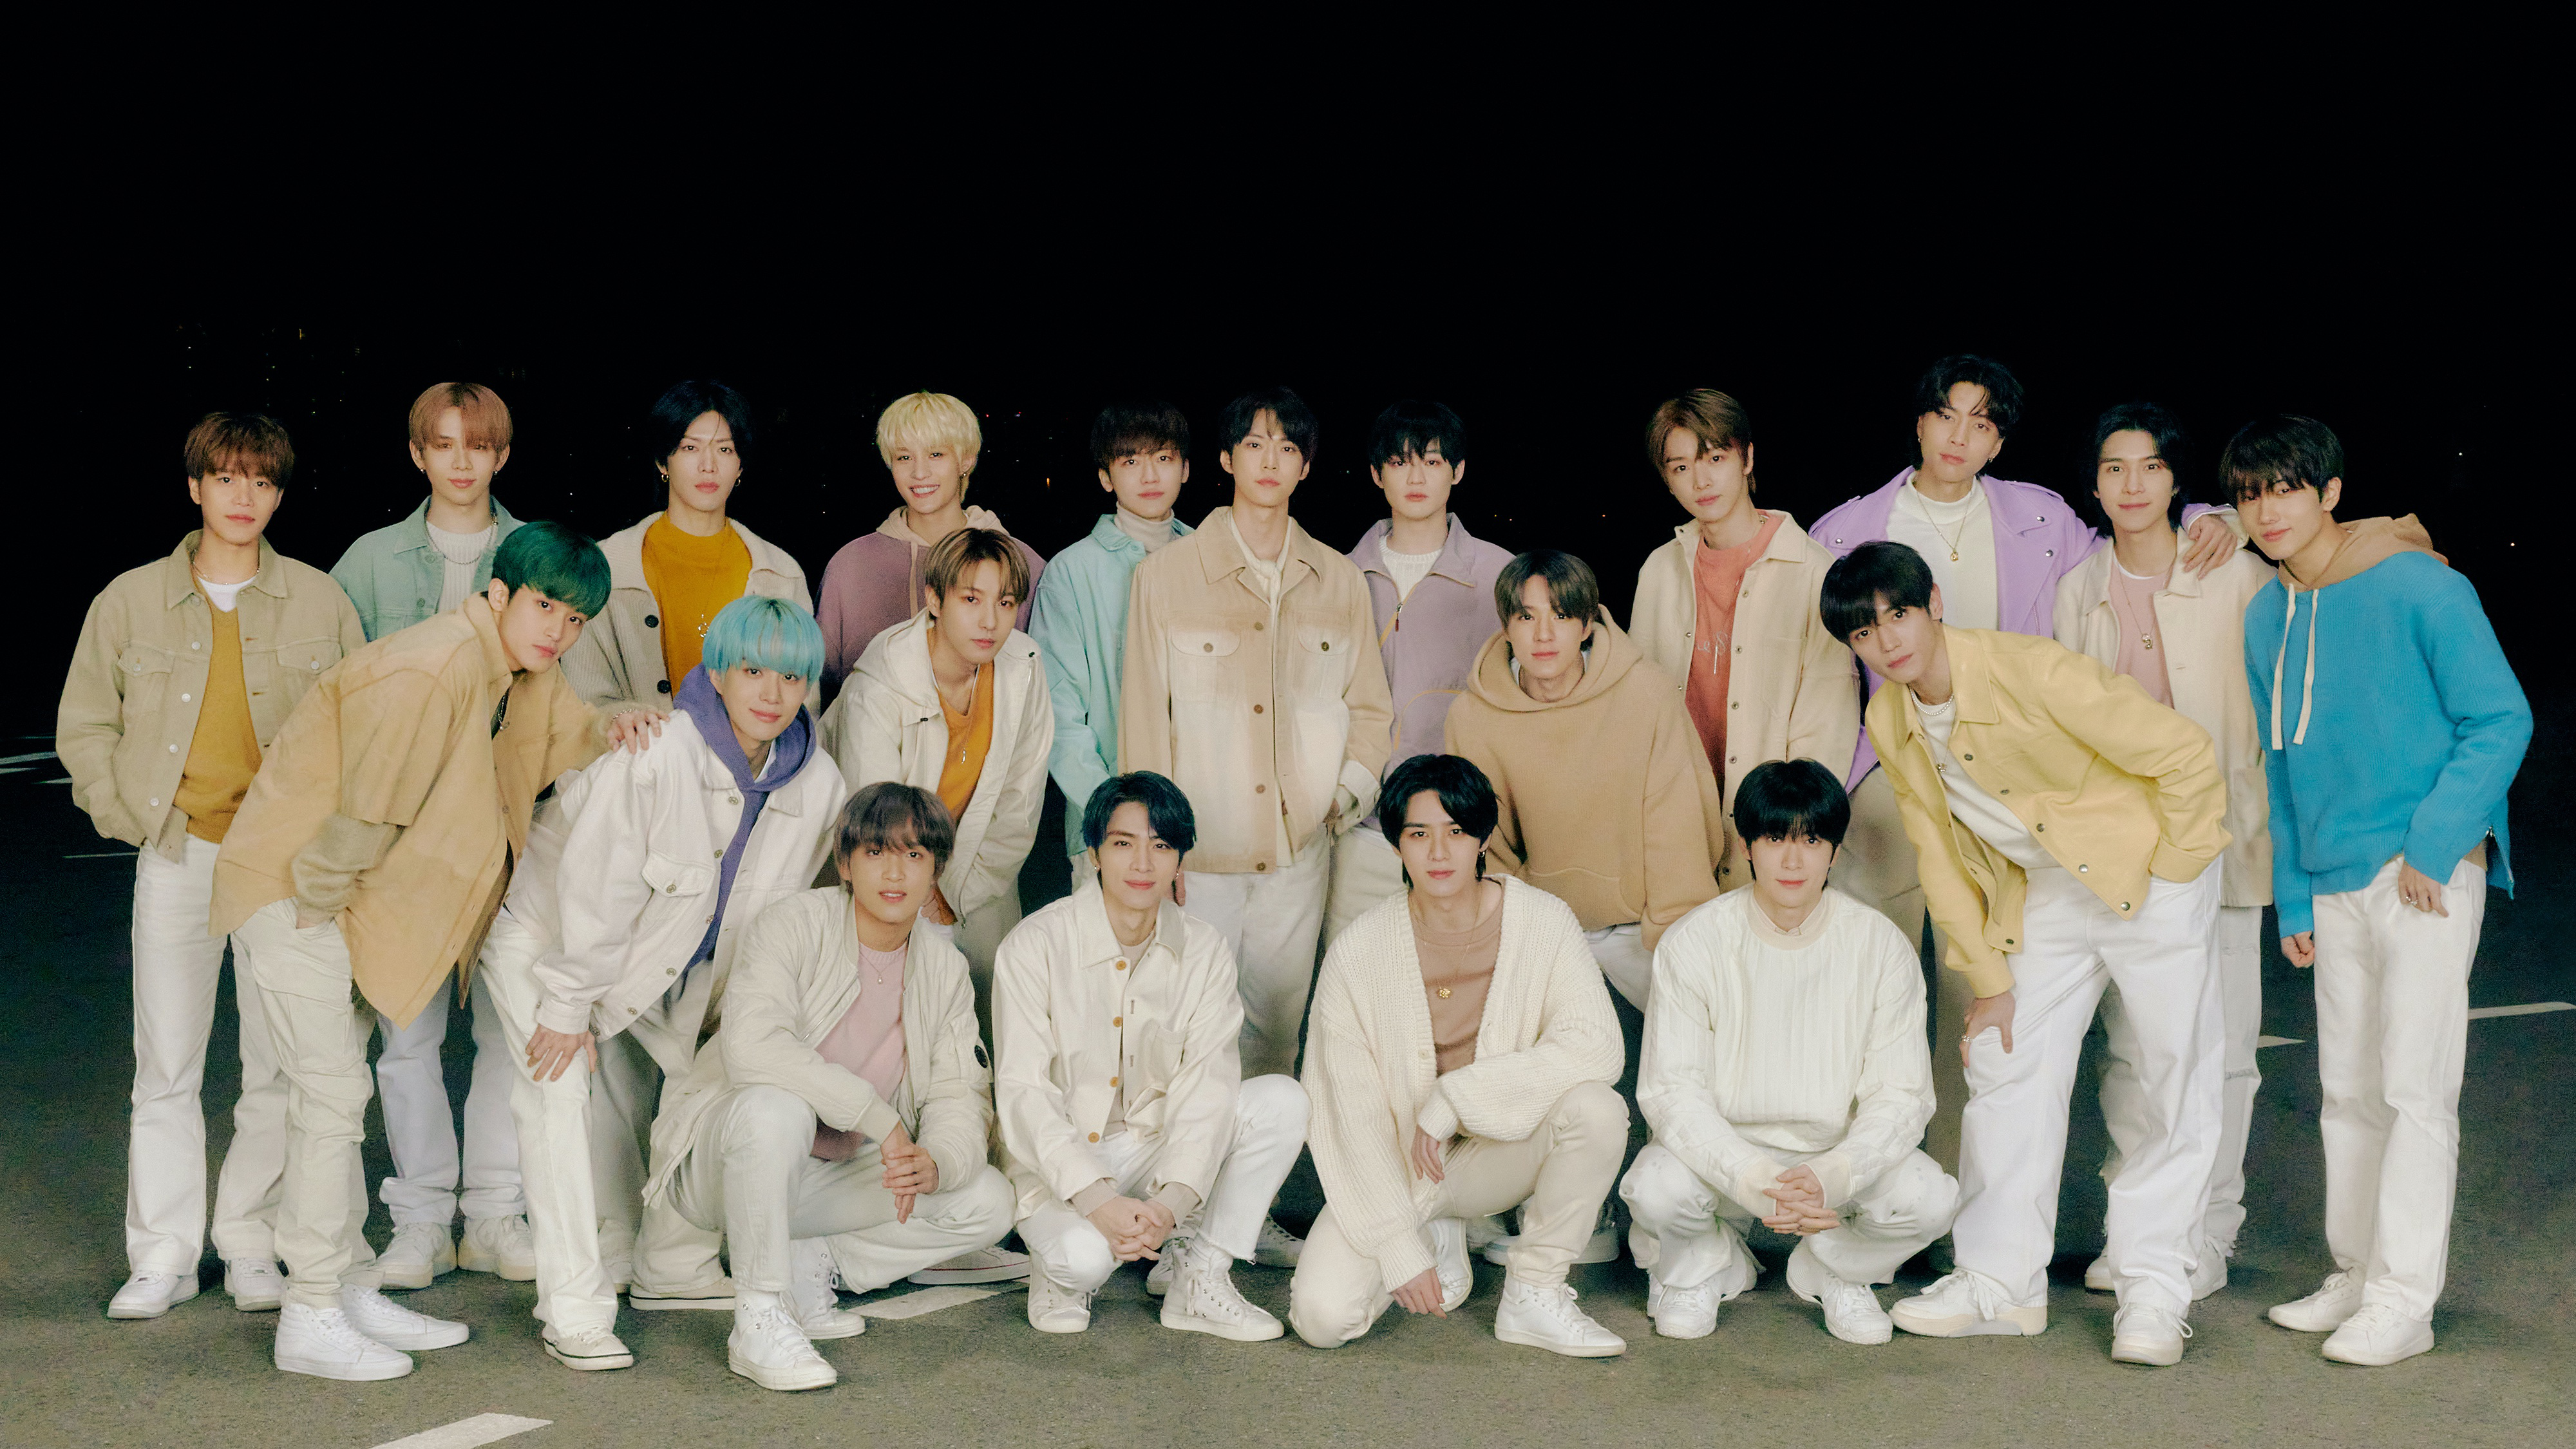 https://static.wikia.nocookie.net/kpop/images/2/20/NCT_Beautiful_group_concept_photo_%282%29.png/revision/latest?cb=20211213002518